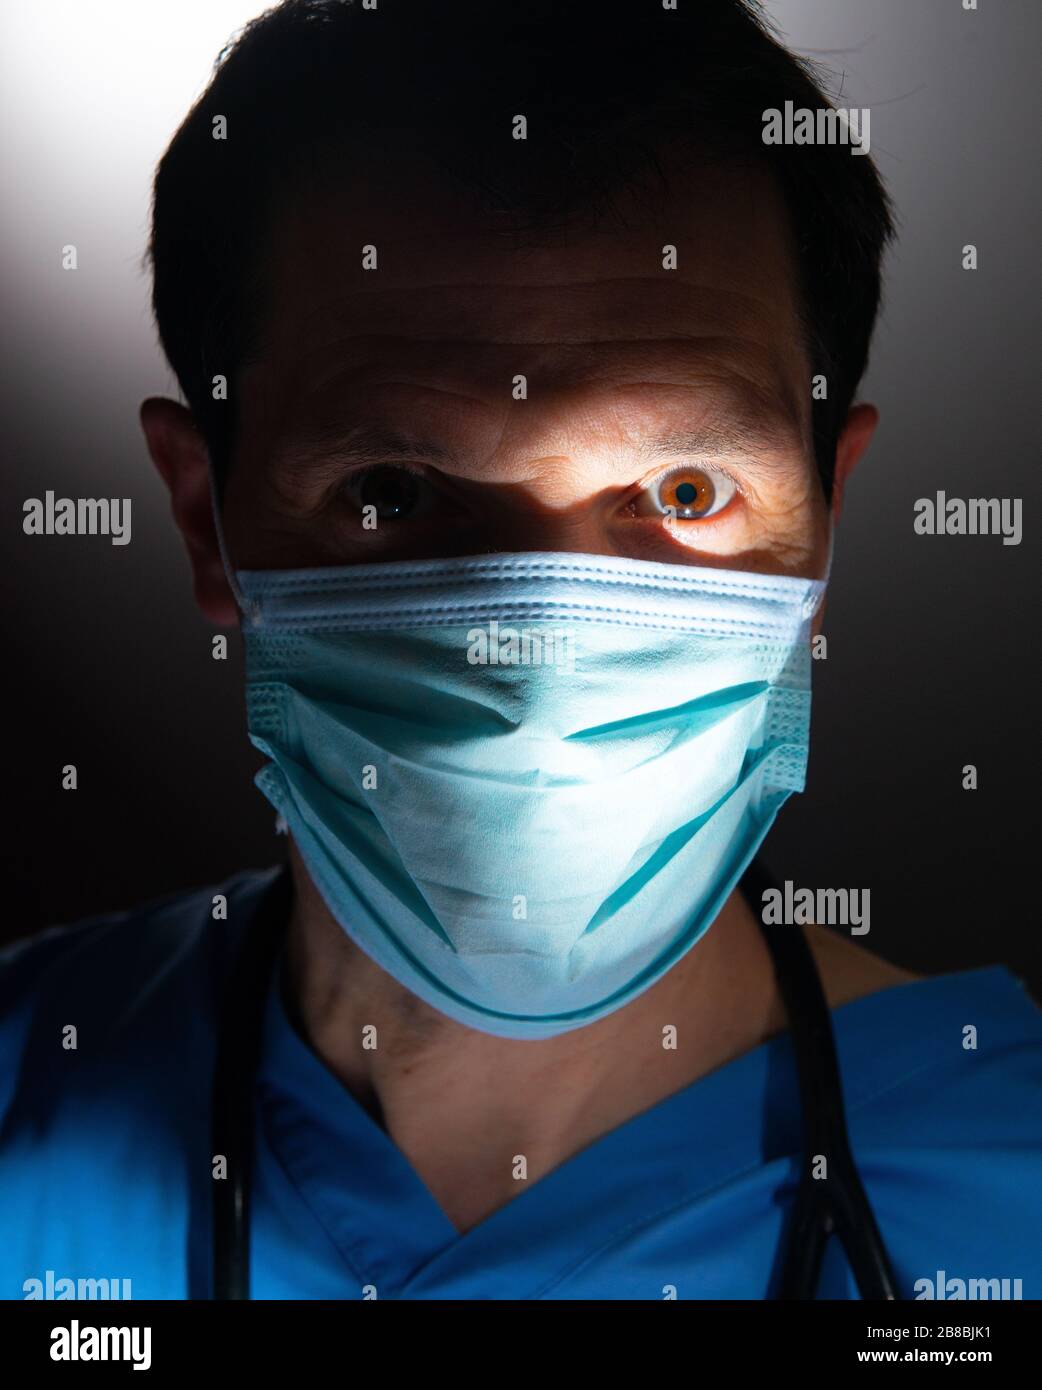 Close up of a concerned doctor with half face in shadow and wearing blue scrubs, with surgical face mask and stethoscope, against a dark background. Stock Photo